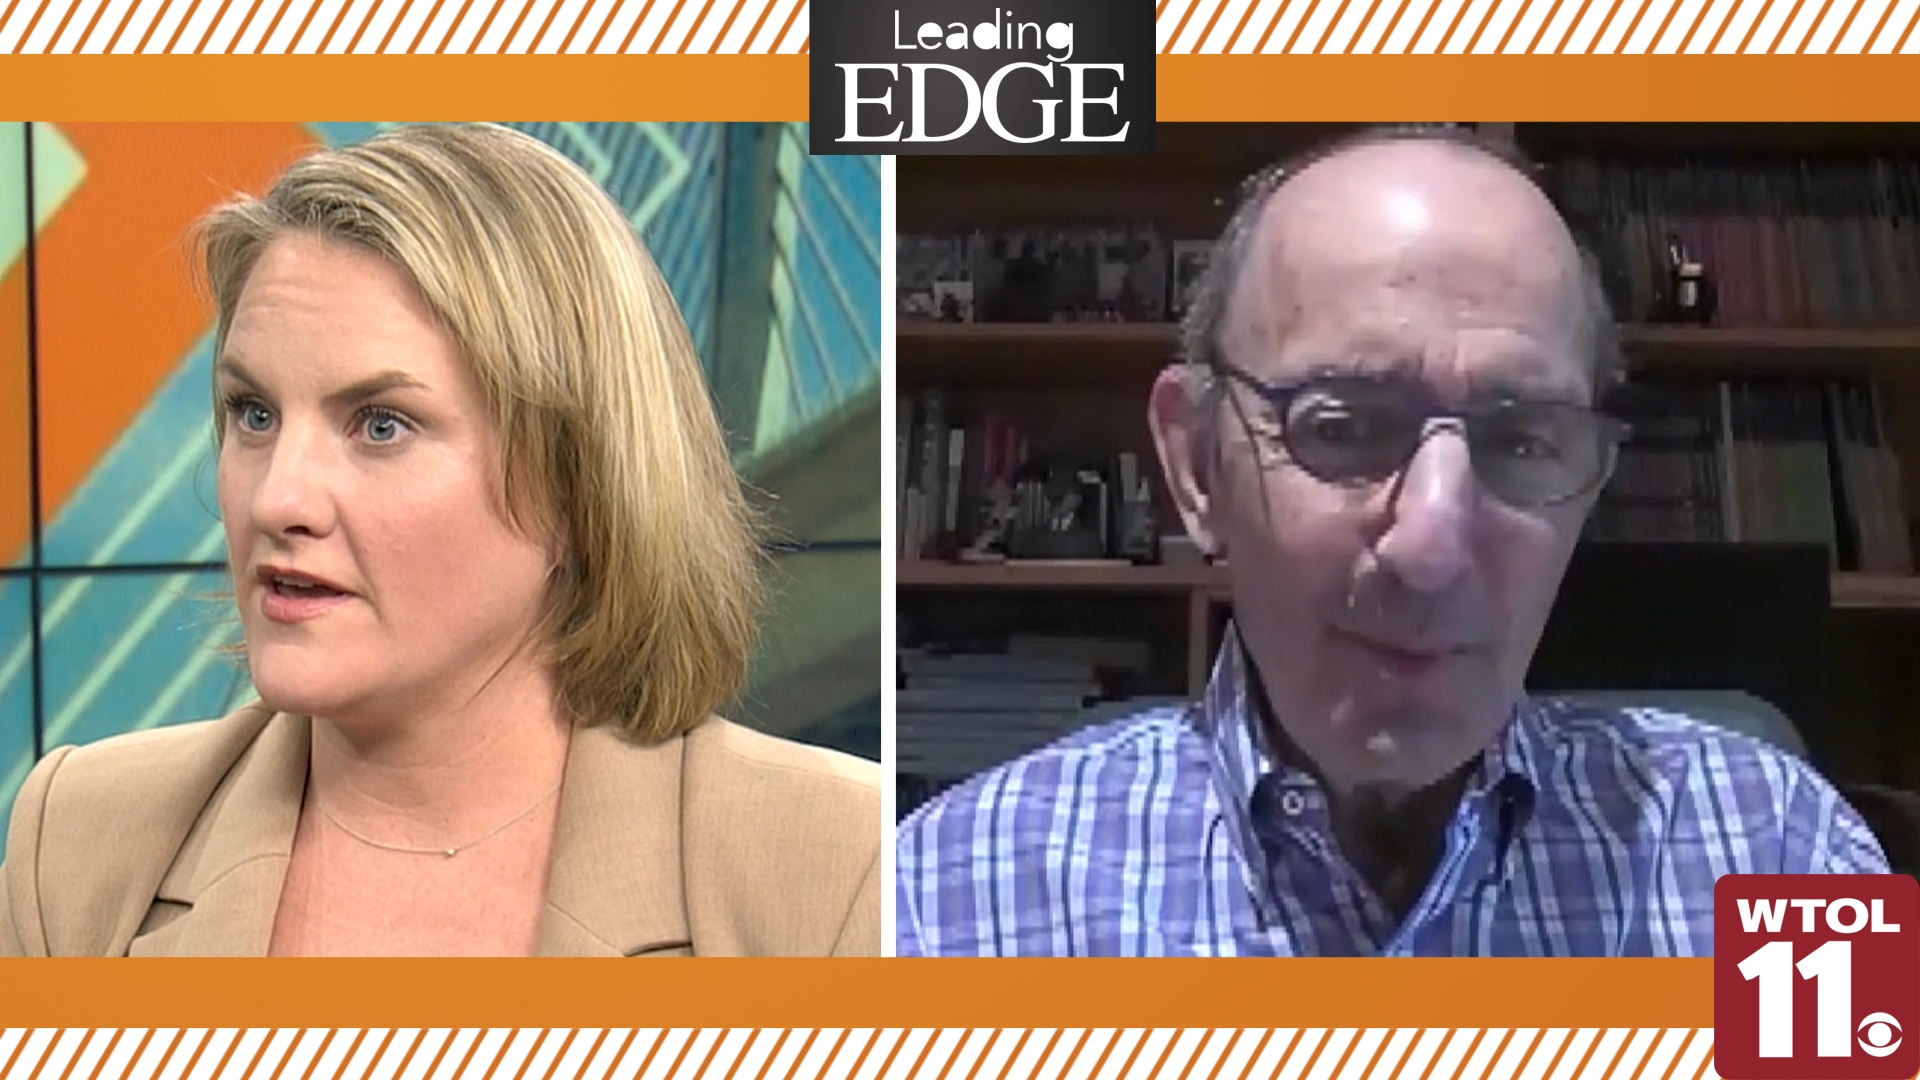 Council president Carrie Hartman talks about issues happening around Toledo. Author Geoffrey Greif discusses the importance of friendships for middle aged men.